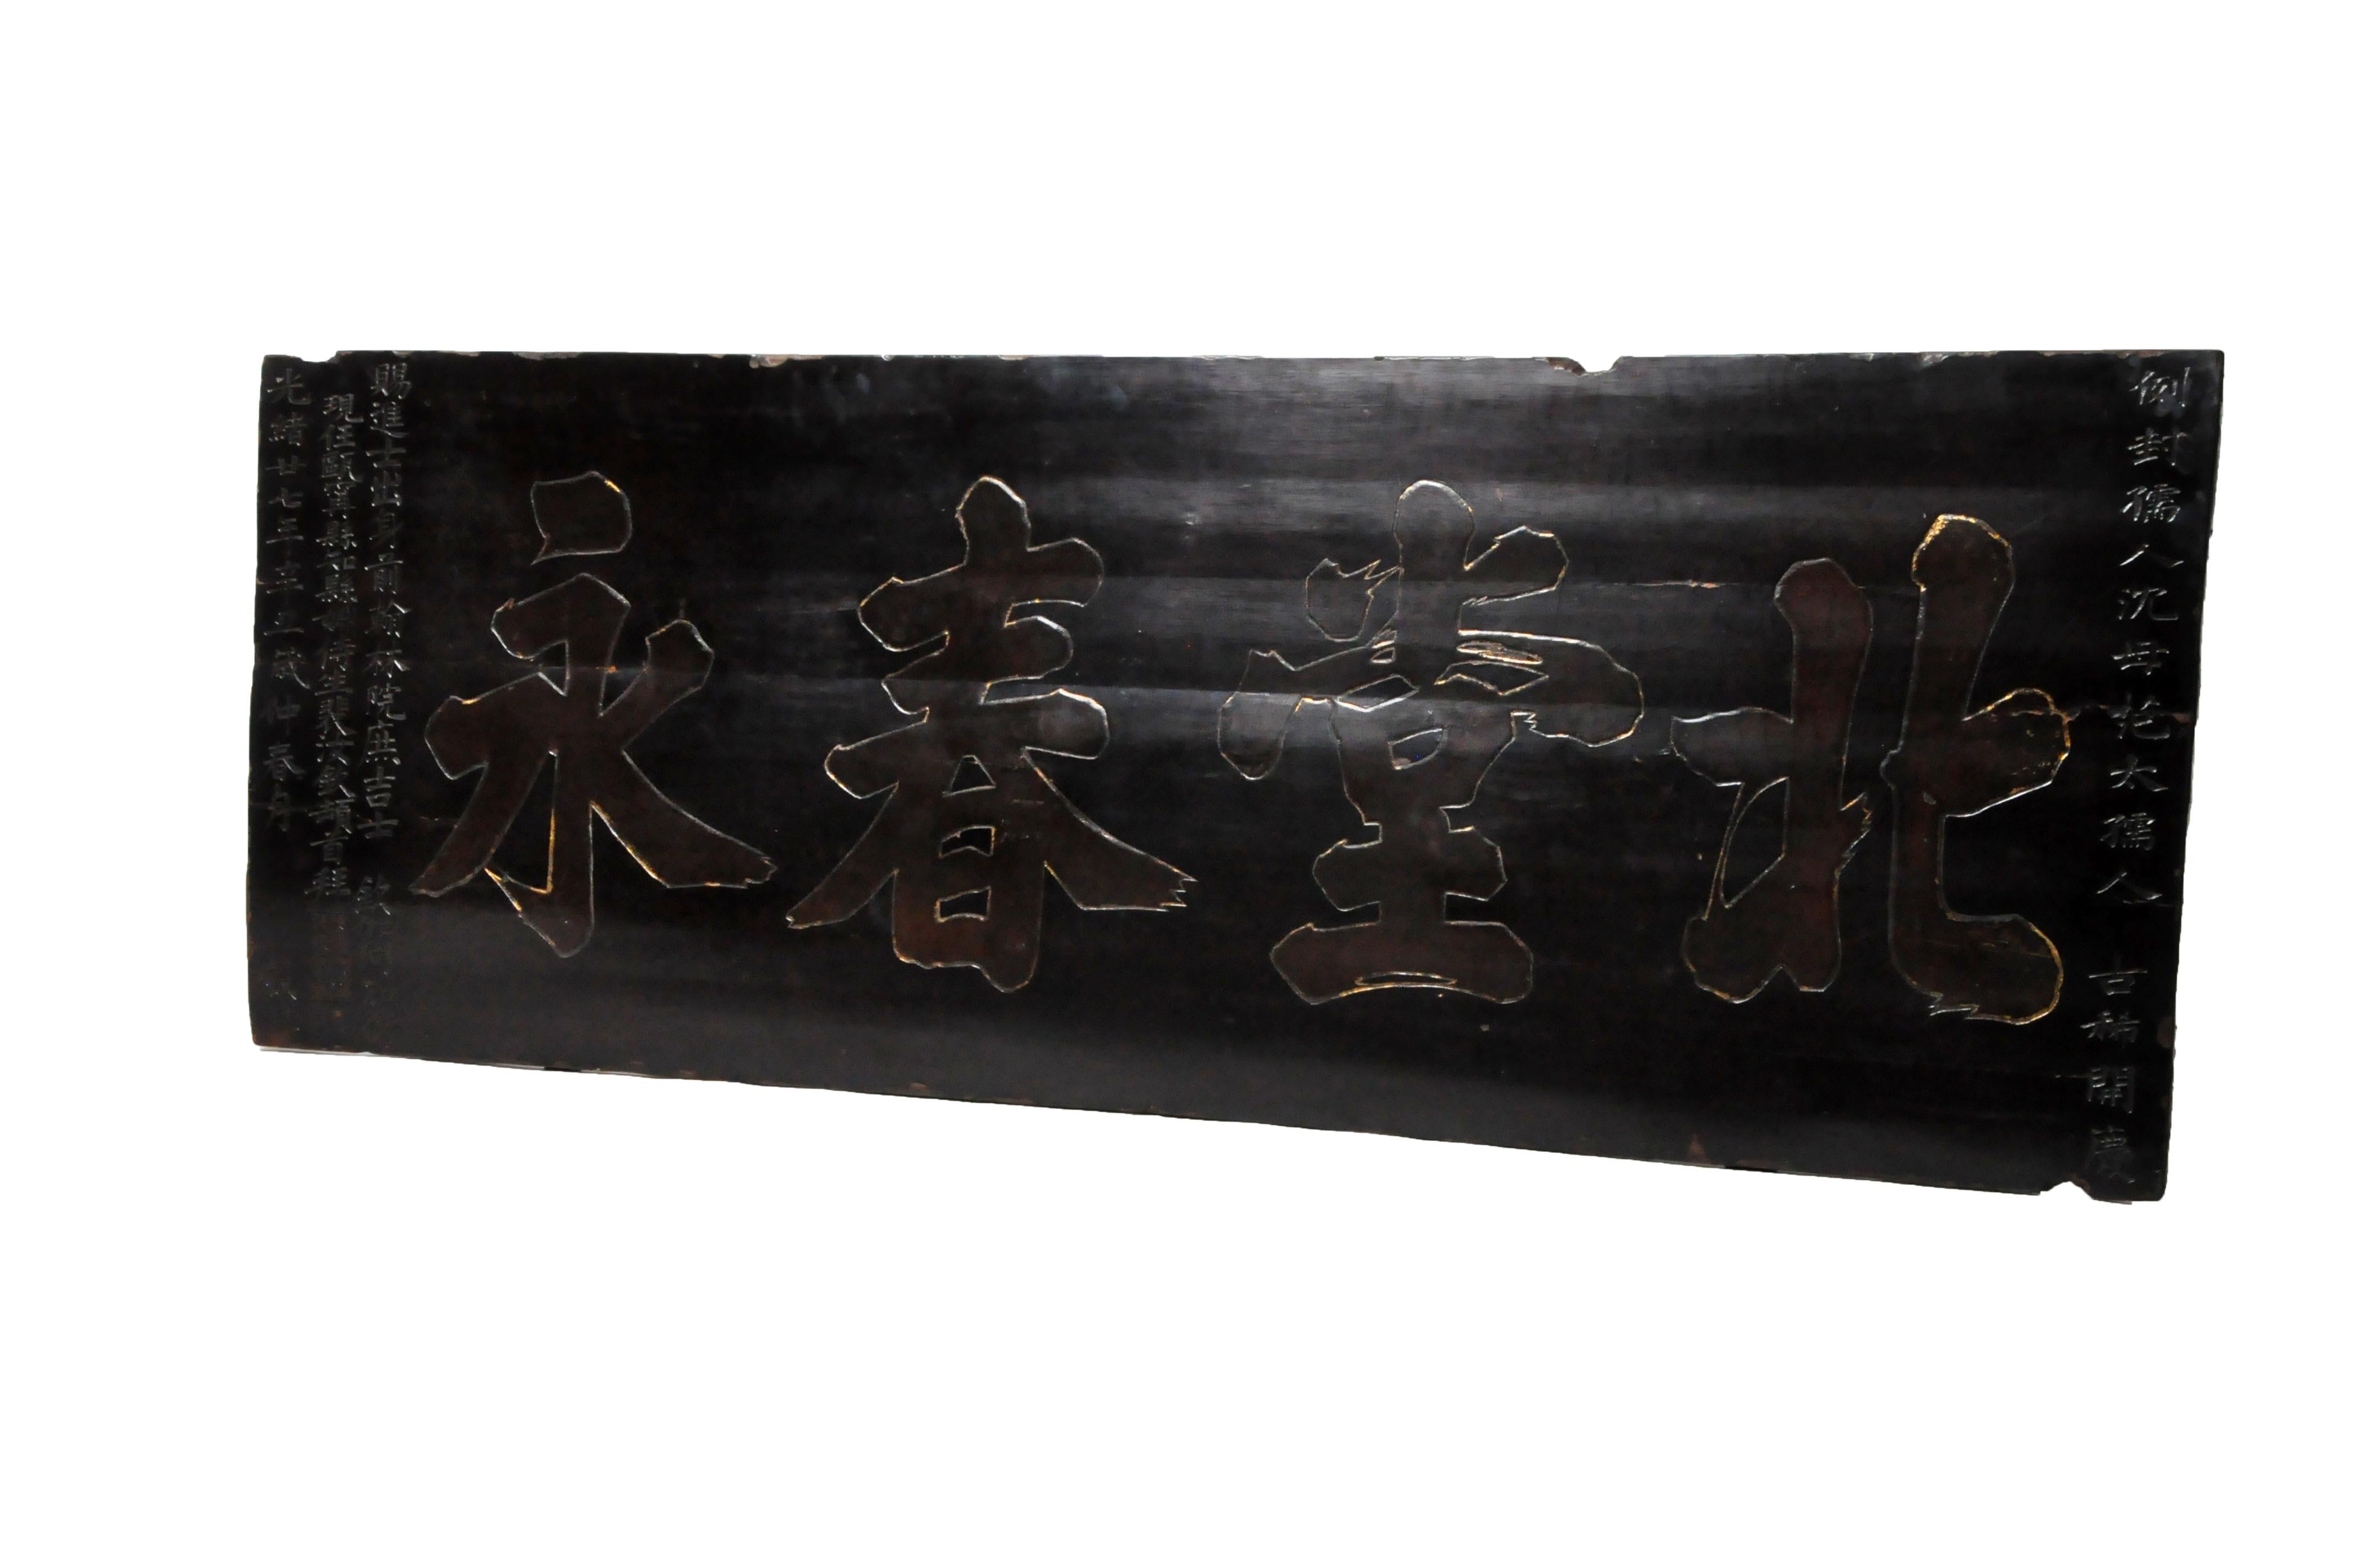 This impressive sign was once hung above the entrance to a Chinese ancestral hall. It is made from planks of Elmwood covered in layers of thick black tree lacquer for protection from the elements. The characters read, from right to left, “north,